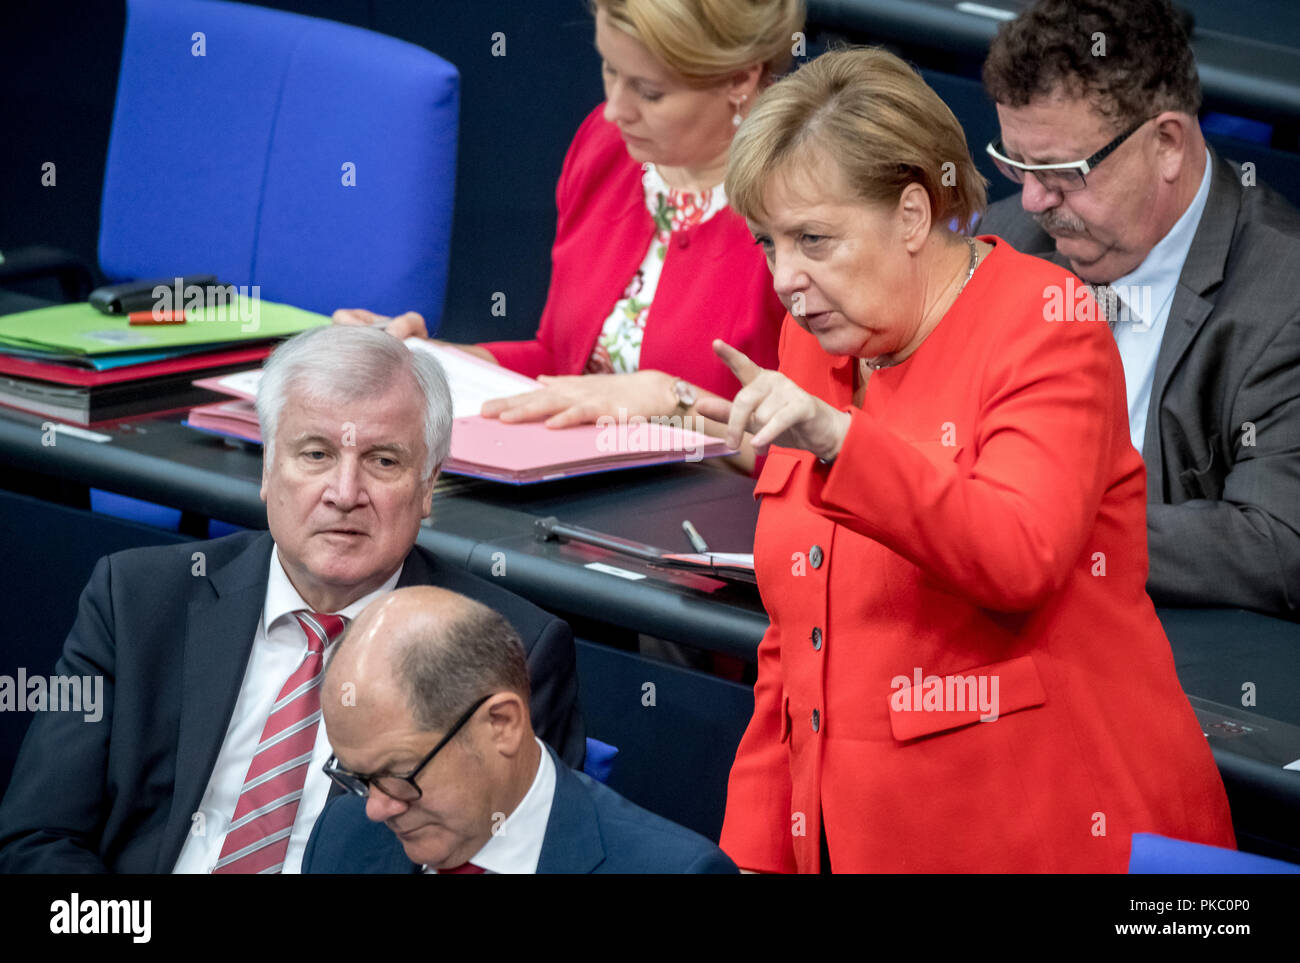 Berlin, Germany. 12th Sep, 2018. Federal Chancellor Angela Merkel (CDU) talks to Horst Seehofer (CSU), Federal Minister of the Interior, Home and Construction, during the general debate in the German Bundestag, while Olaf Scholz (SPD, front), Federal Minister of Finance and Hans-Joachim Fuchtel (CDU, r), State Secretary in the Ministry of Agriculture and Franziska Giffey (SPD, back left), Federal Family Minister sit on the government bench. Credit: dpa picture alliance/Alamy Live News Stock Photo